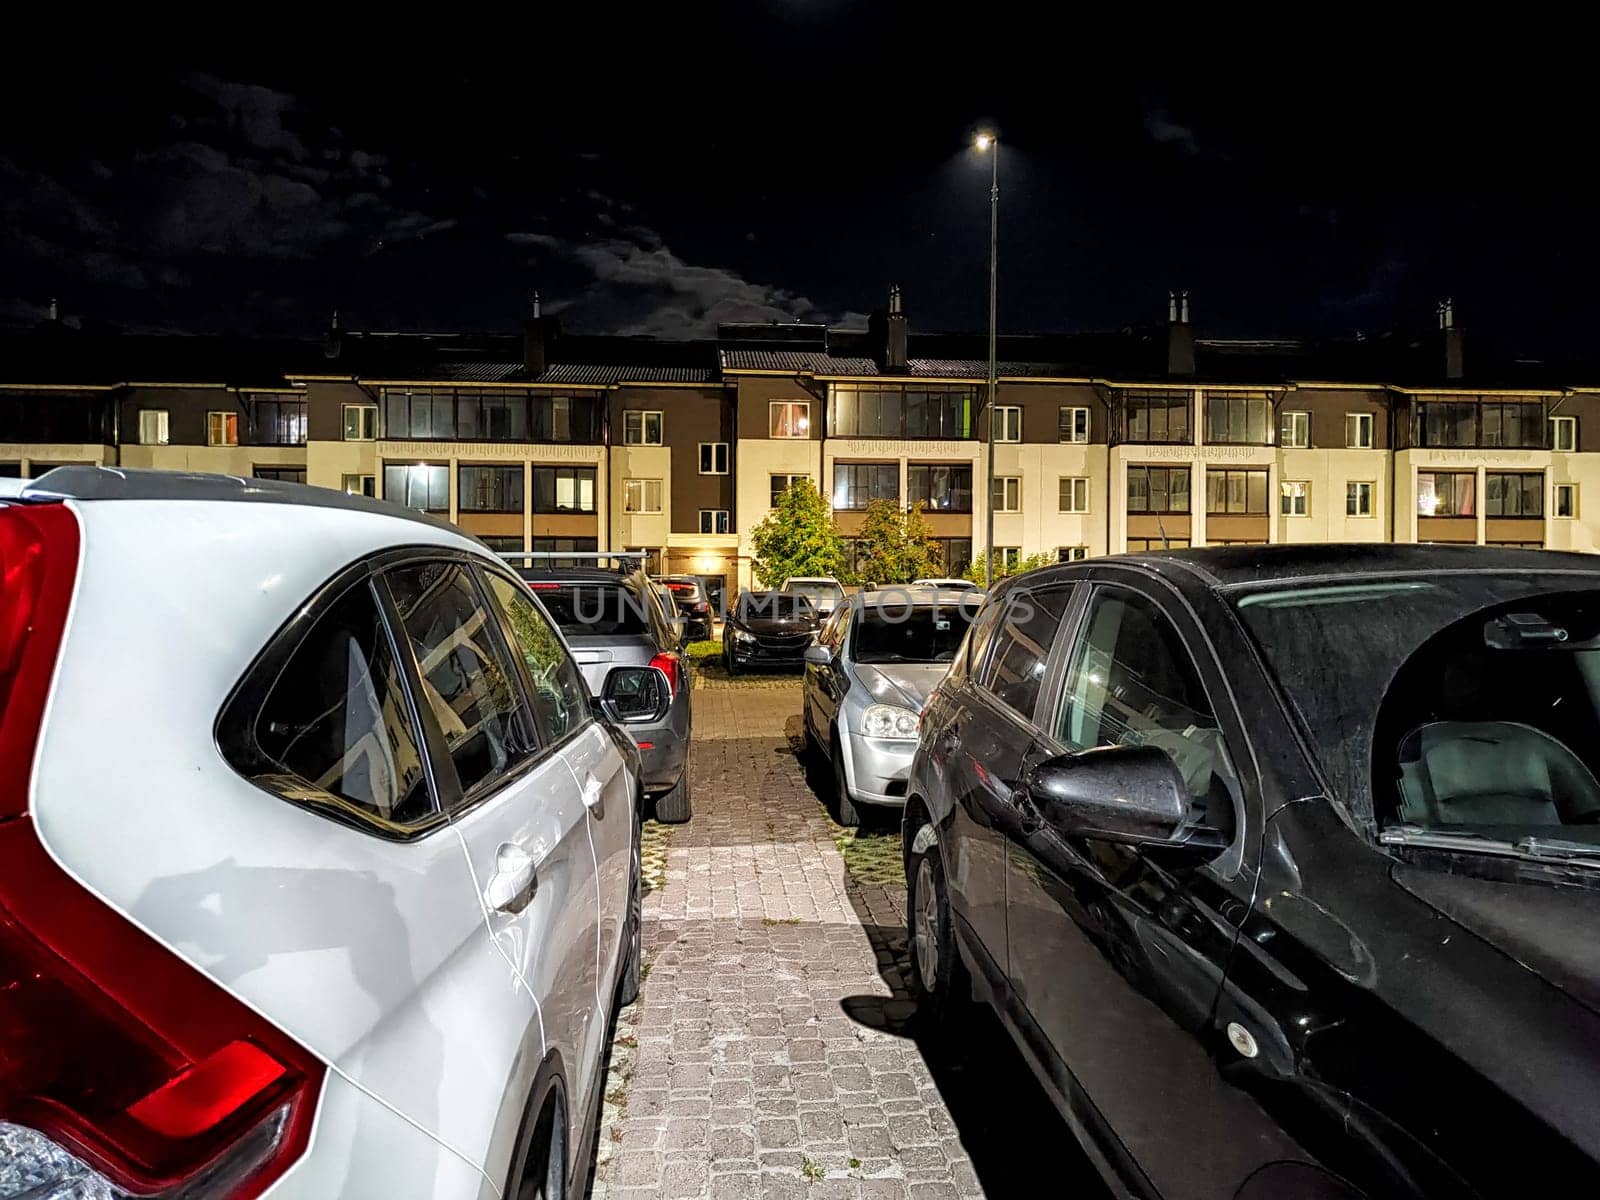 Cars parked under artificial lights against a backdrop of residential buildings at night